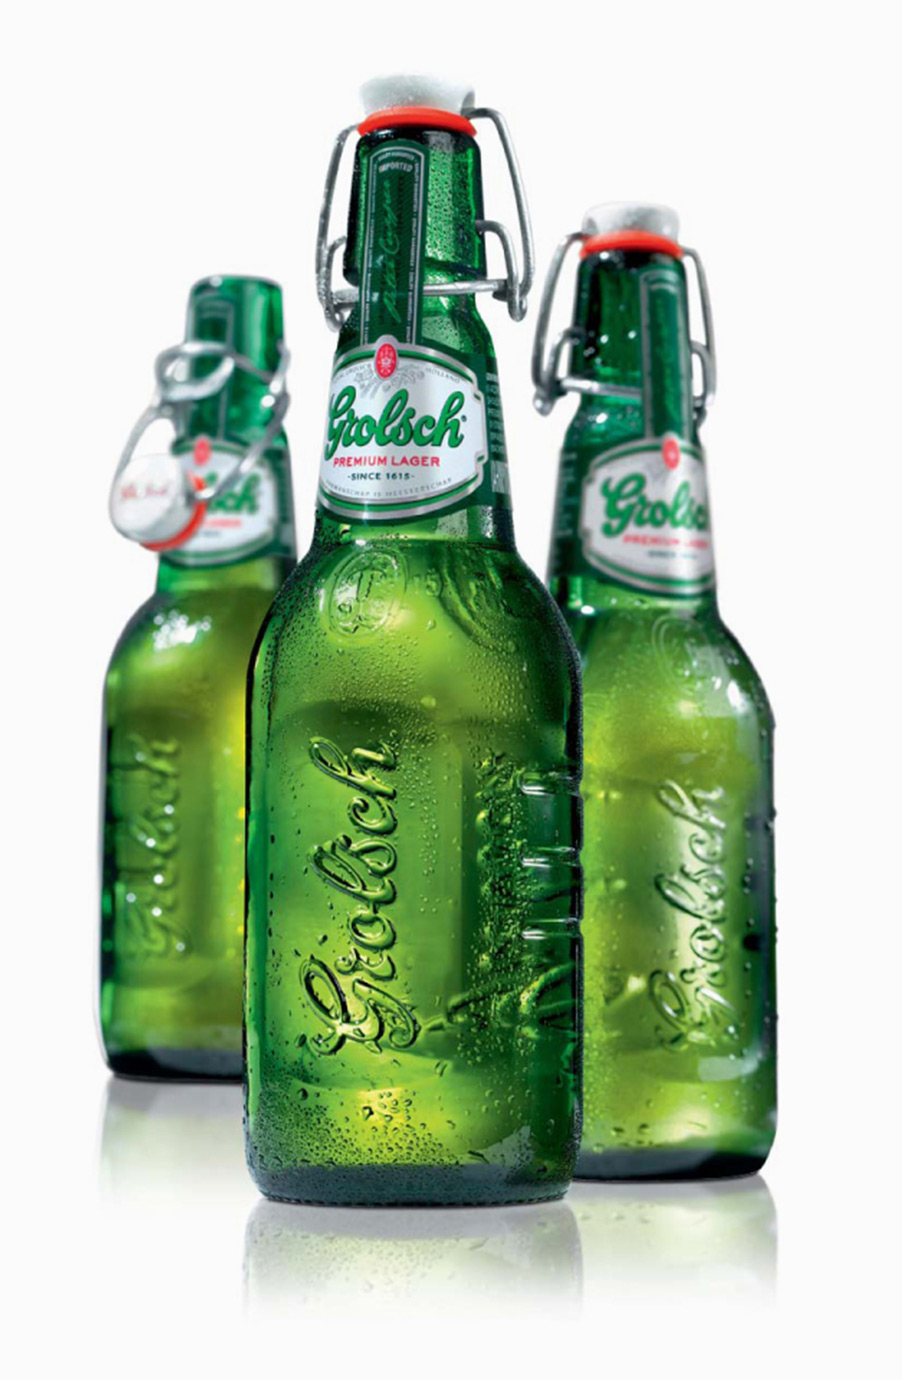 Grolsch Builds Engagement with Bluetooth Bottle Caps